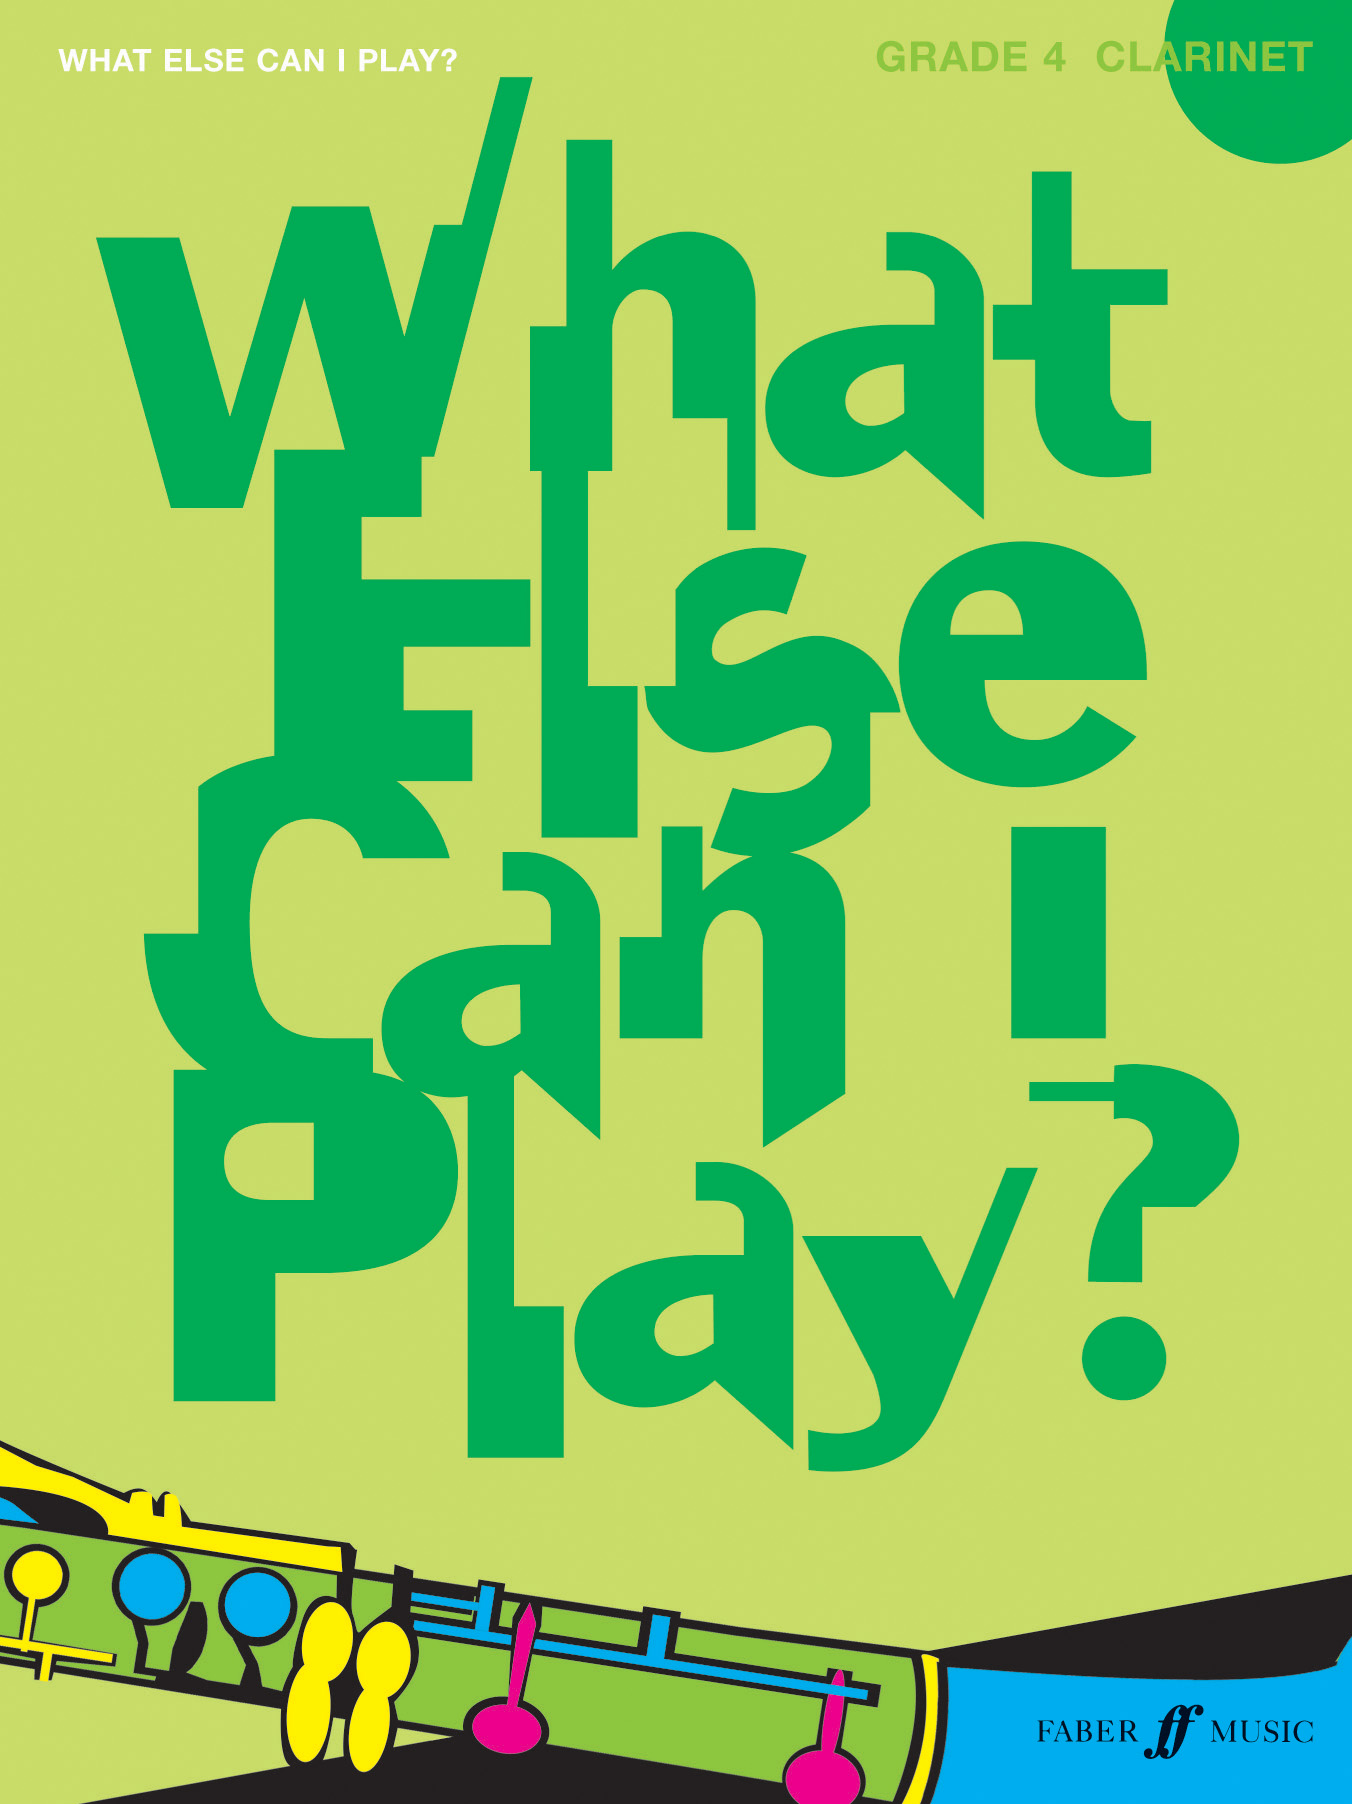 Various: What else can I play - Clarinet Grade 4: Clarinet: Instrumental Album